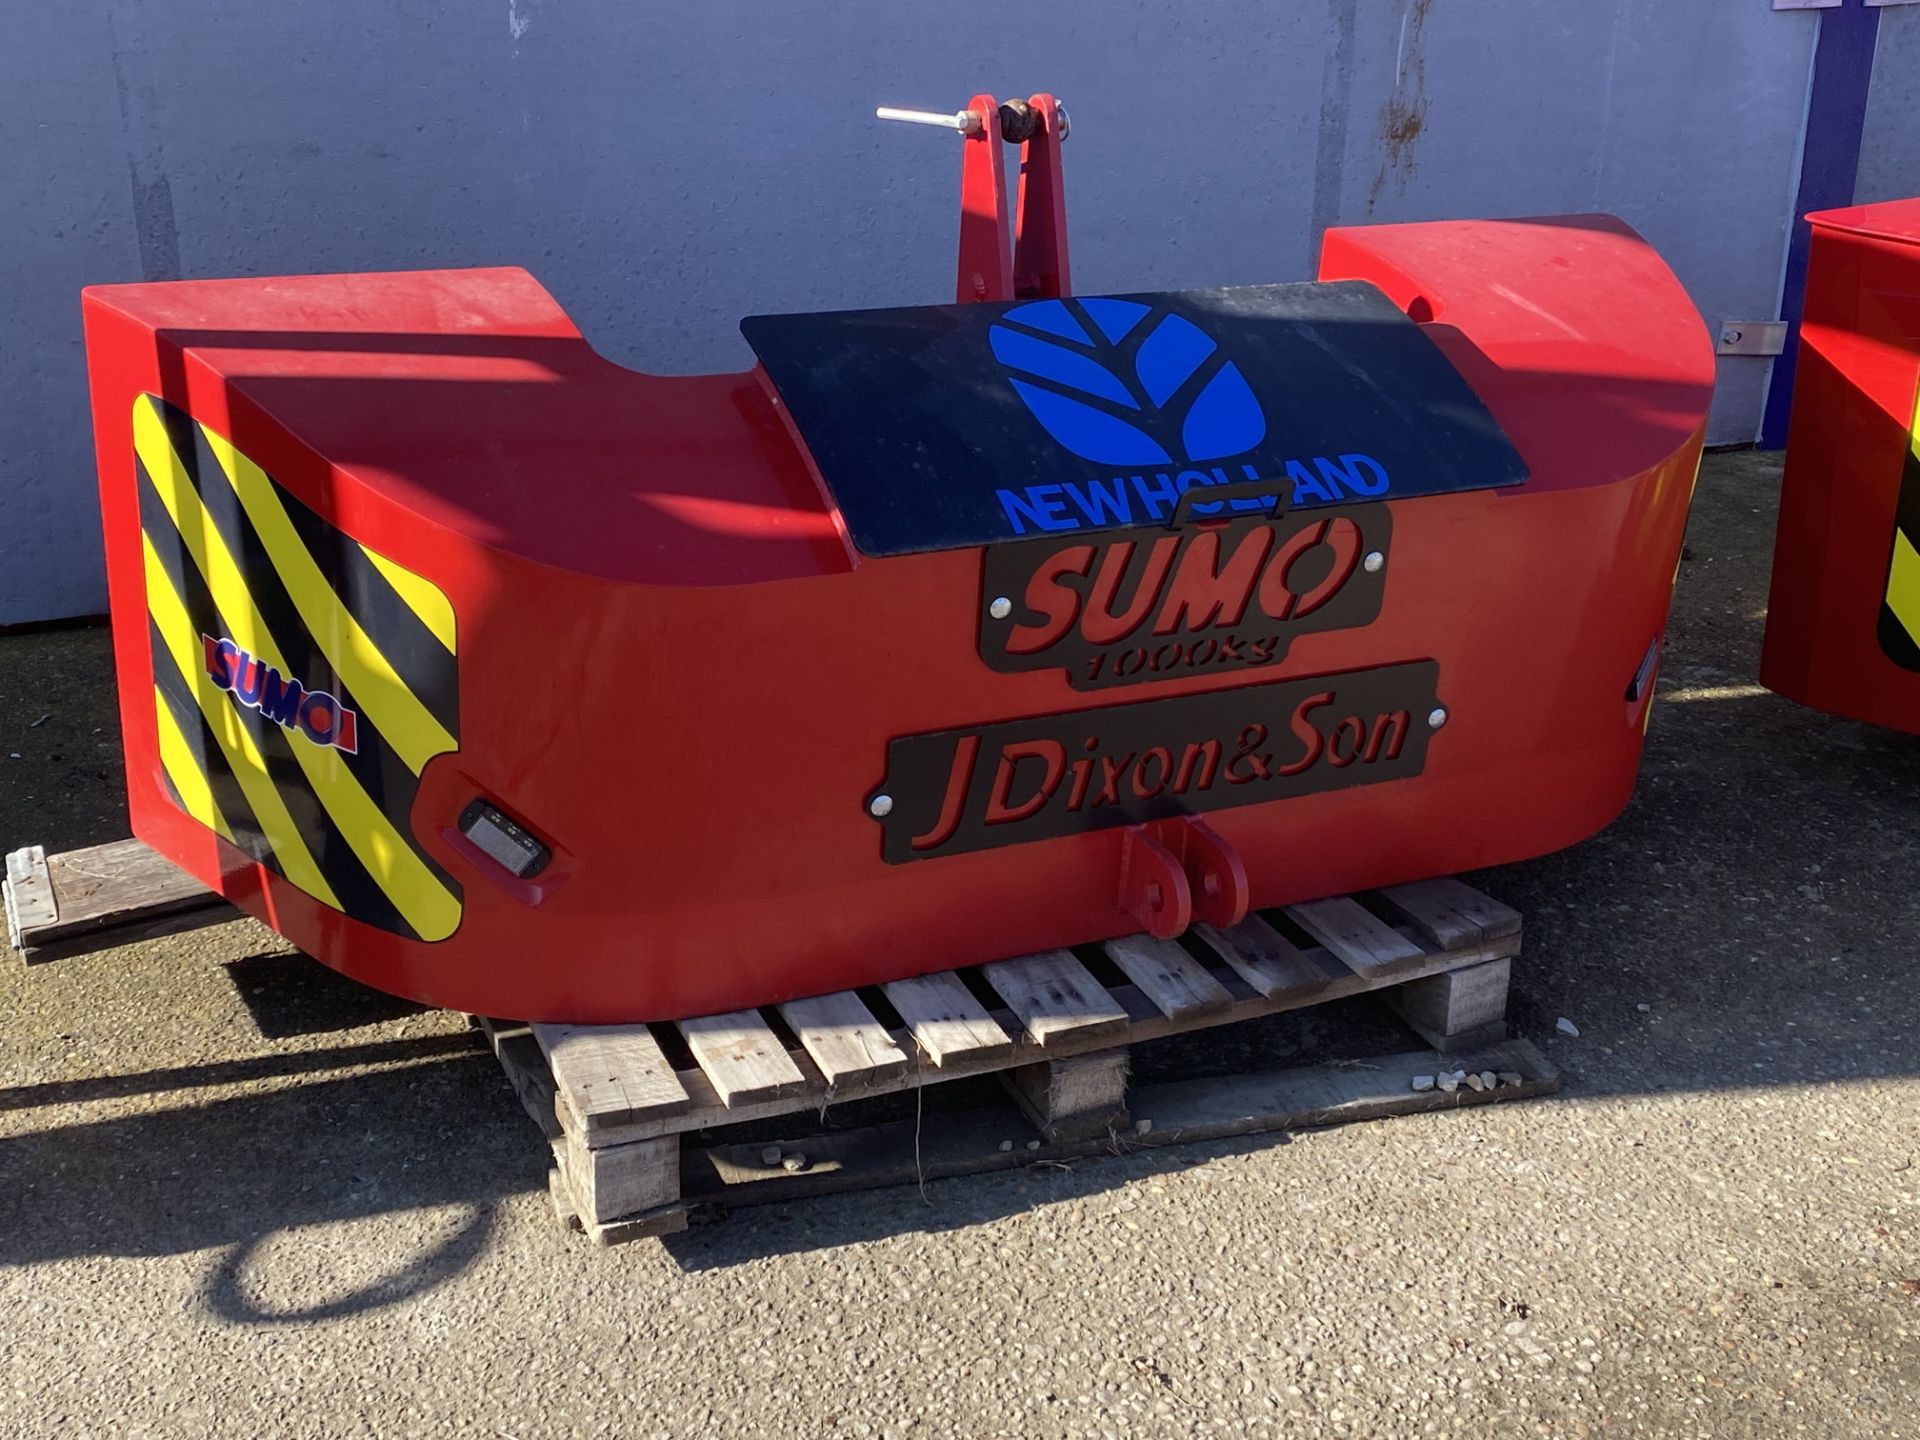 Sumo 1000kgs front mounted Weight Block c/w tool box (to fit the above). - Image 3 of 4